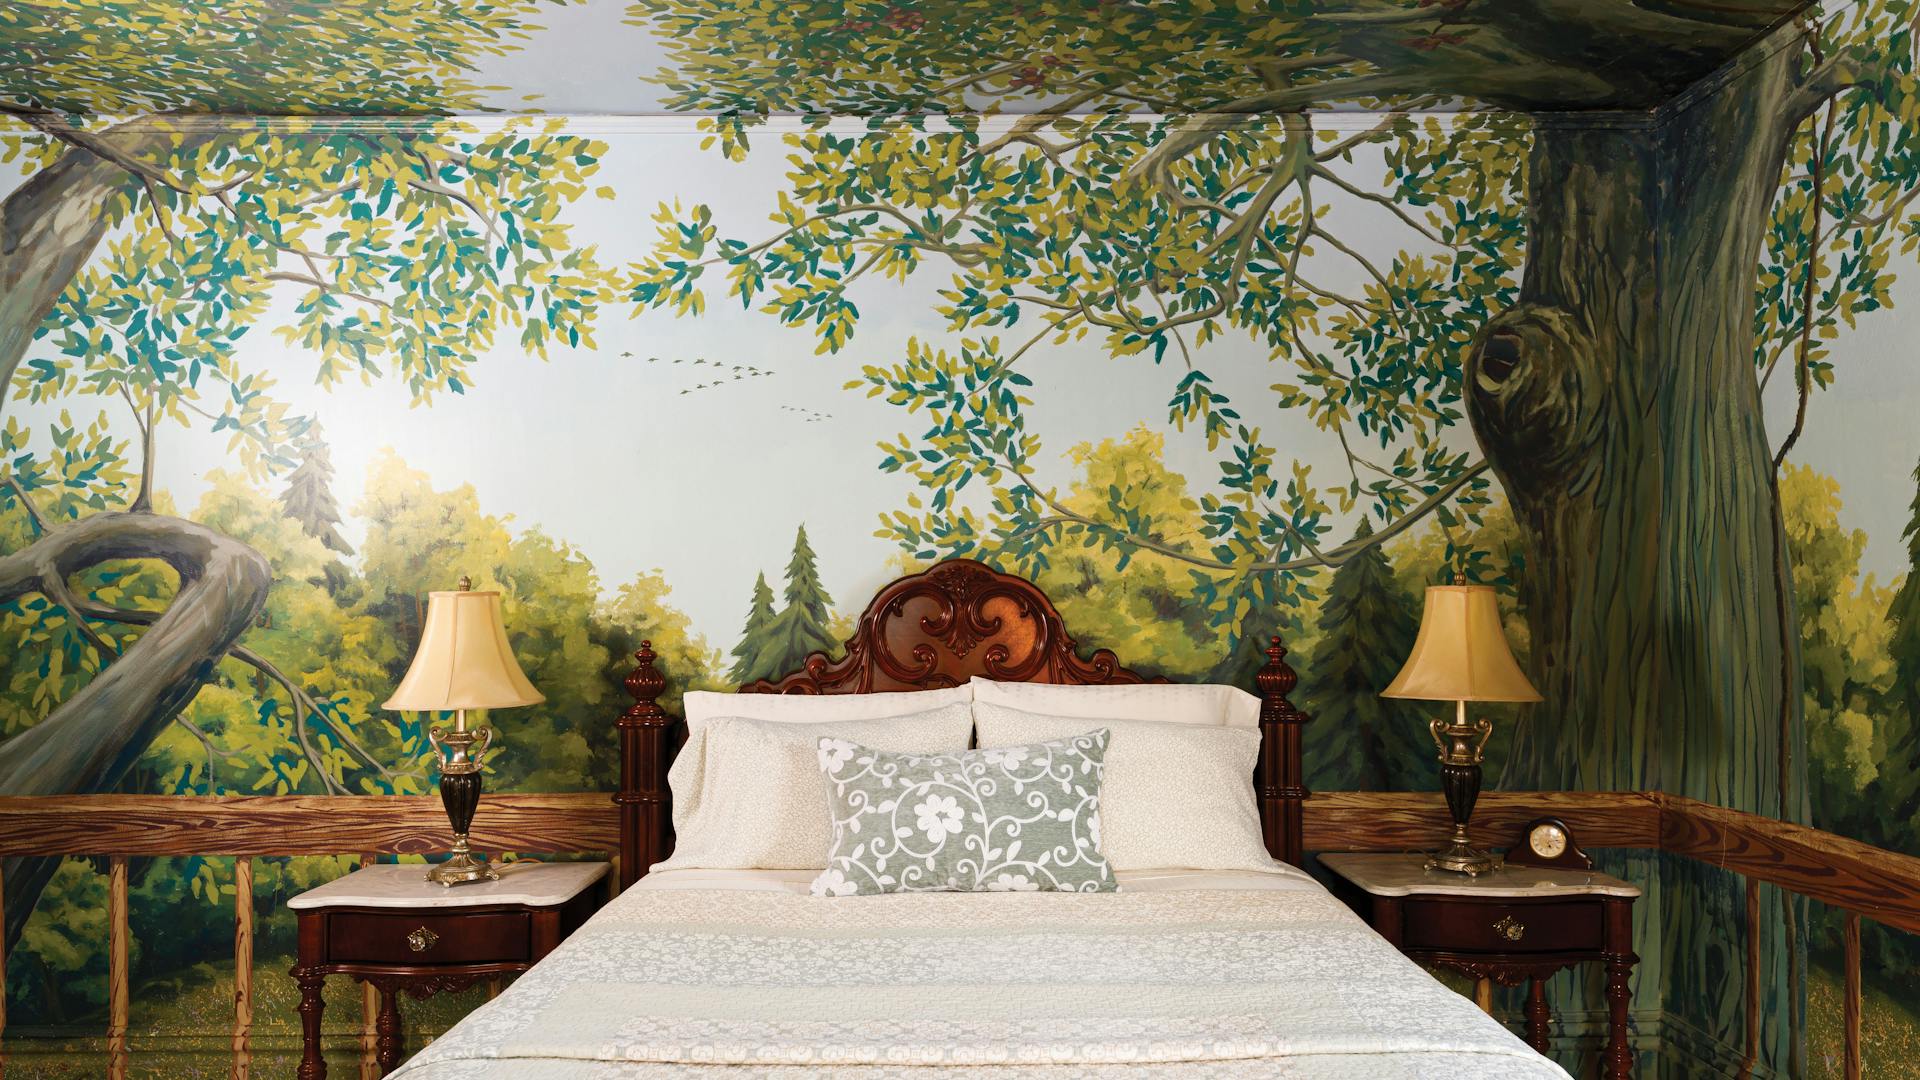 Sherwood Forest Bed & Breakfast in Douglas, Michigan (photo courtesy of destination)